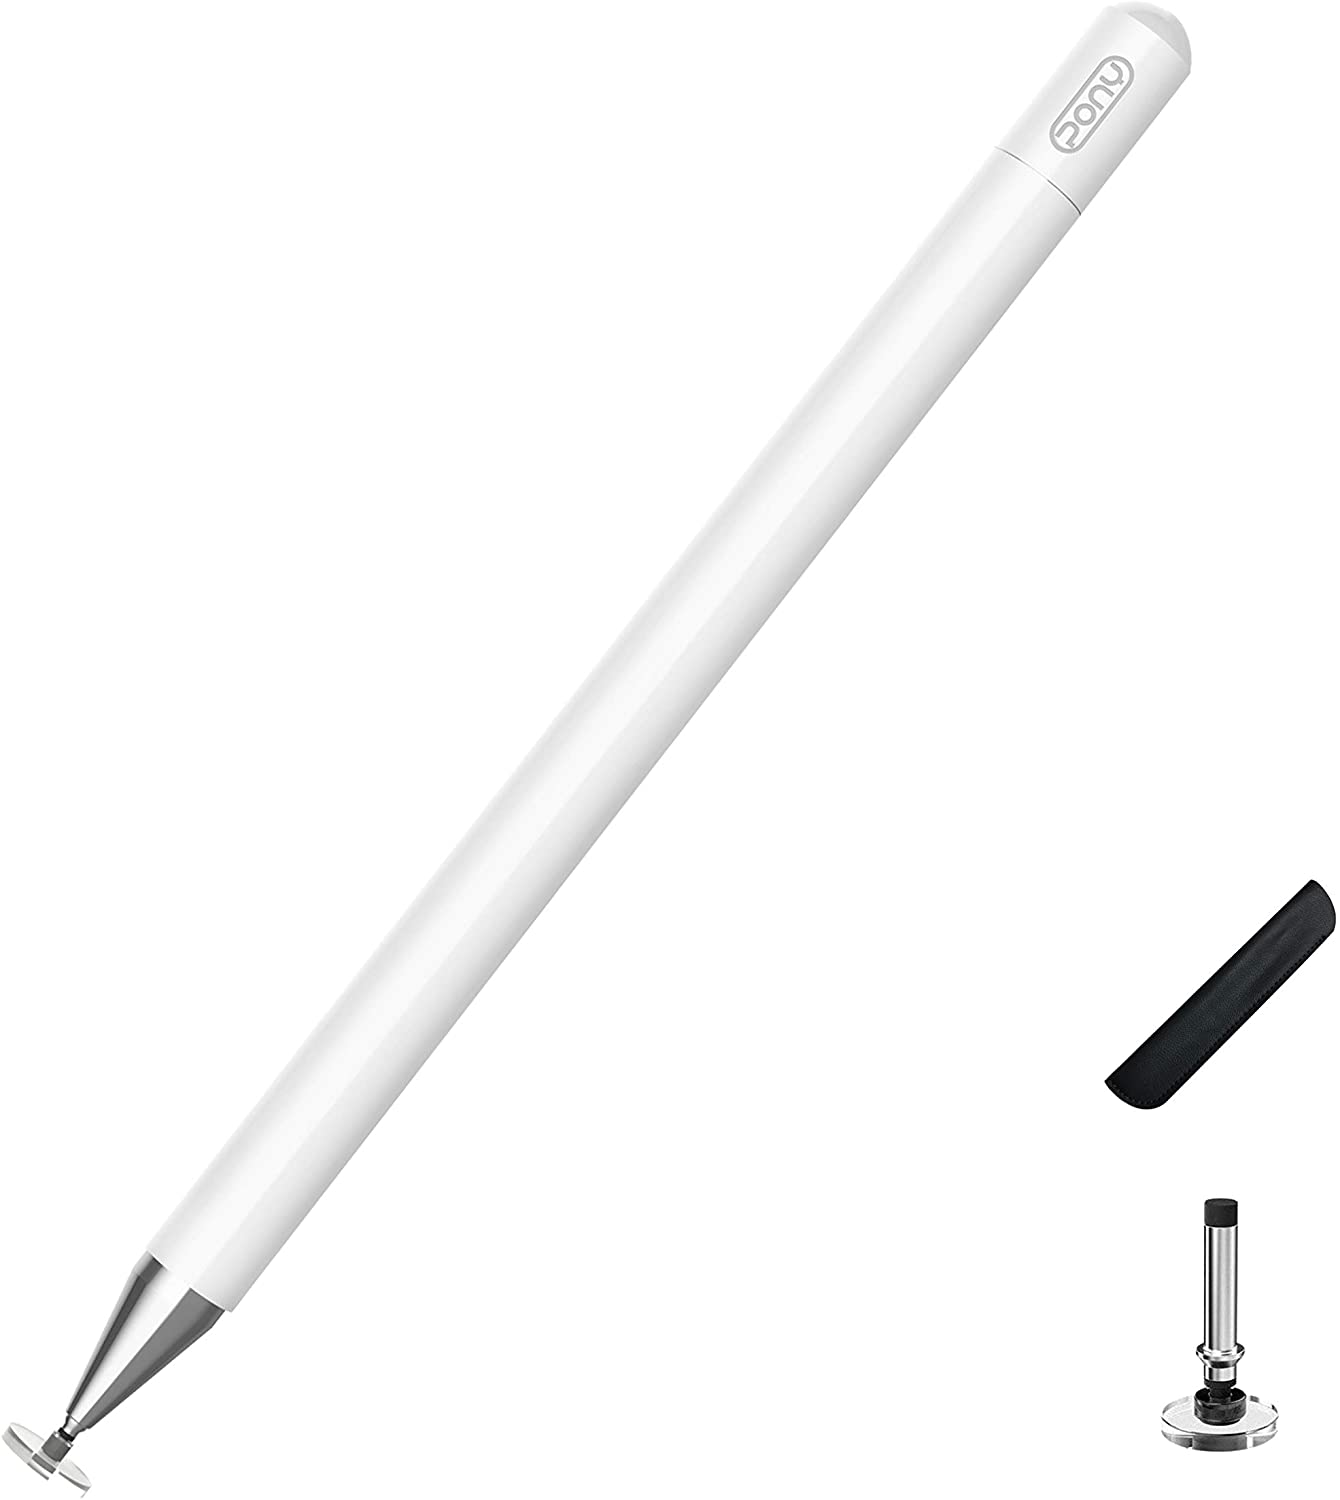 Stylus For iPad, PONY White Capacitive Pen High Sensitivity & Fine Point, Magnetism Cover Cap.